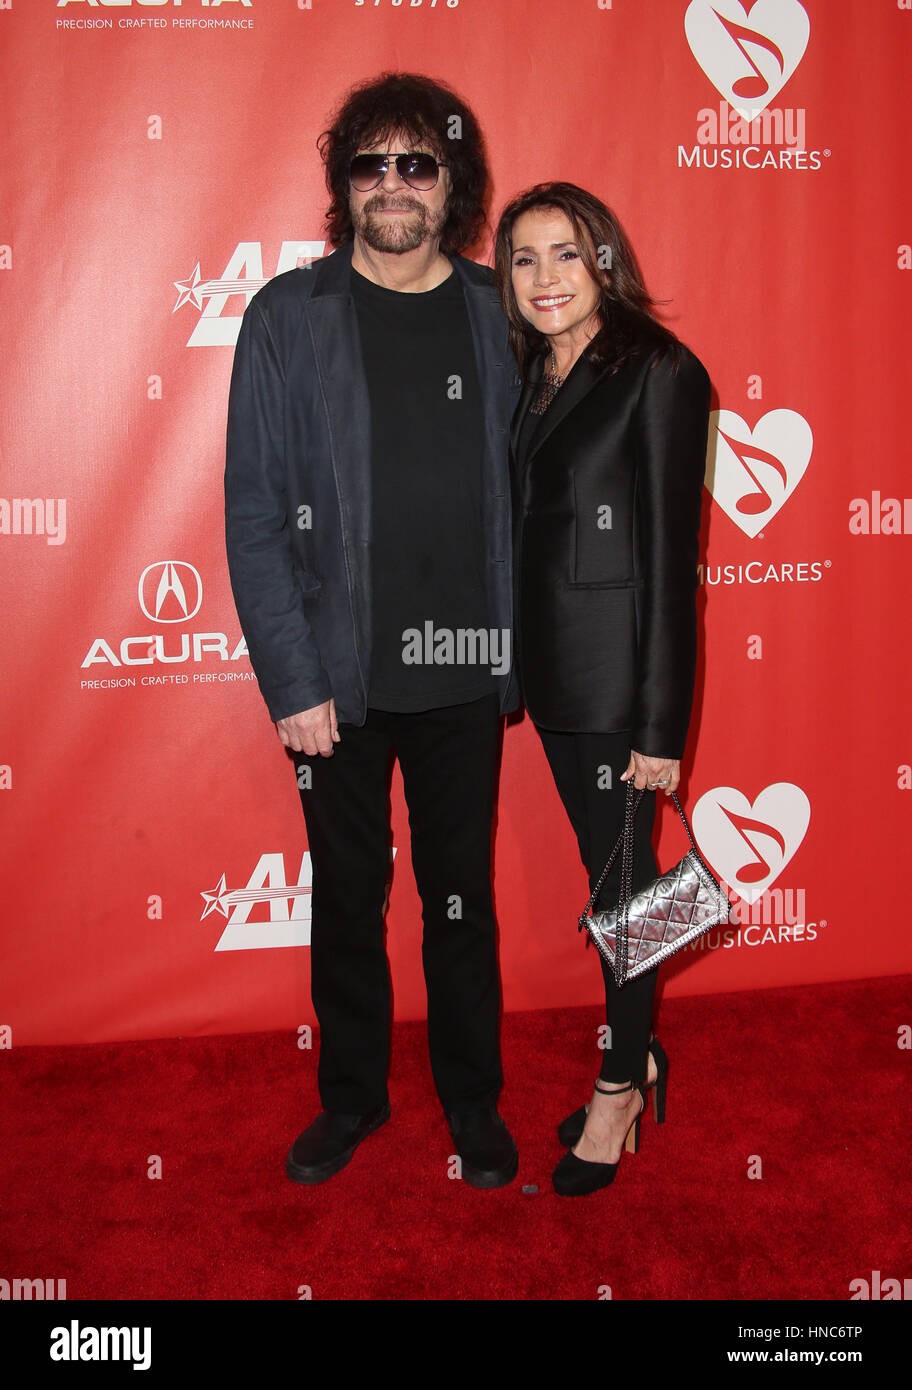 Los Angeles, CA, USA. 10th Feb, 2017. Jeff Lynne, Sani Kapelson Lynne, At 59th GRAMMY Awards - MusiCares Person of the Year Honoring Tom Petty, At Los Angeles Convention Center In California on February 10, 2017. Stock Photo